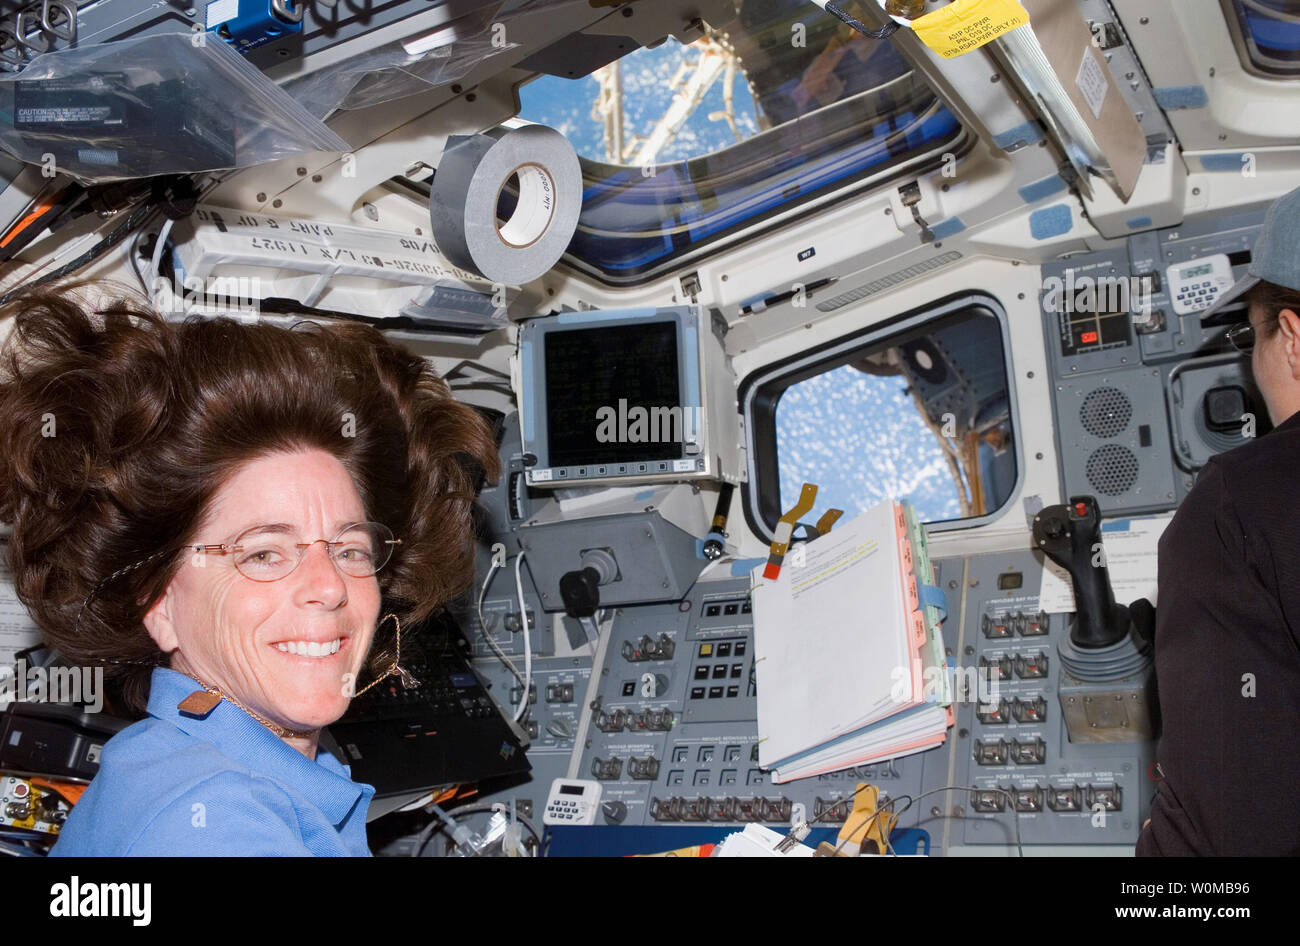 A NASA photo shows teacher/astronaut Barbara R. Morgan on the Space Shuttle Endeavor as it is docked with the International Space Station on August 12, 2007. Morgan transformed the space shuttle and space station into a classroom on August 14 for her first education session from orbit, fulfilling the legacy of Christa McAuliffe, the first teacher/astronaut who was aboard the doomed 1986 Challenger flight.  (UPI Photo/NASA/FILES) Stock Photo